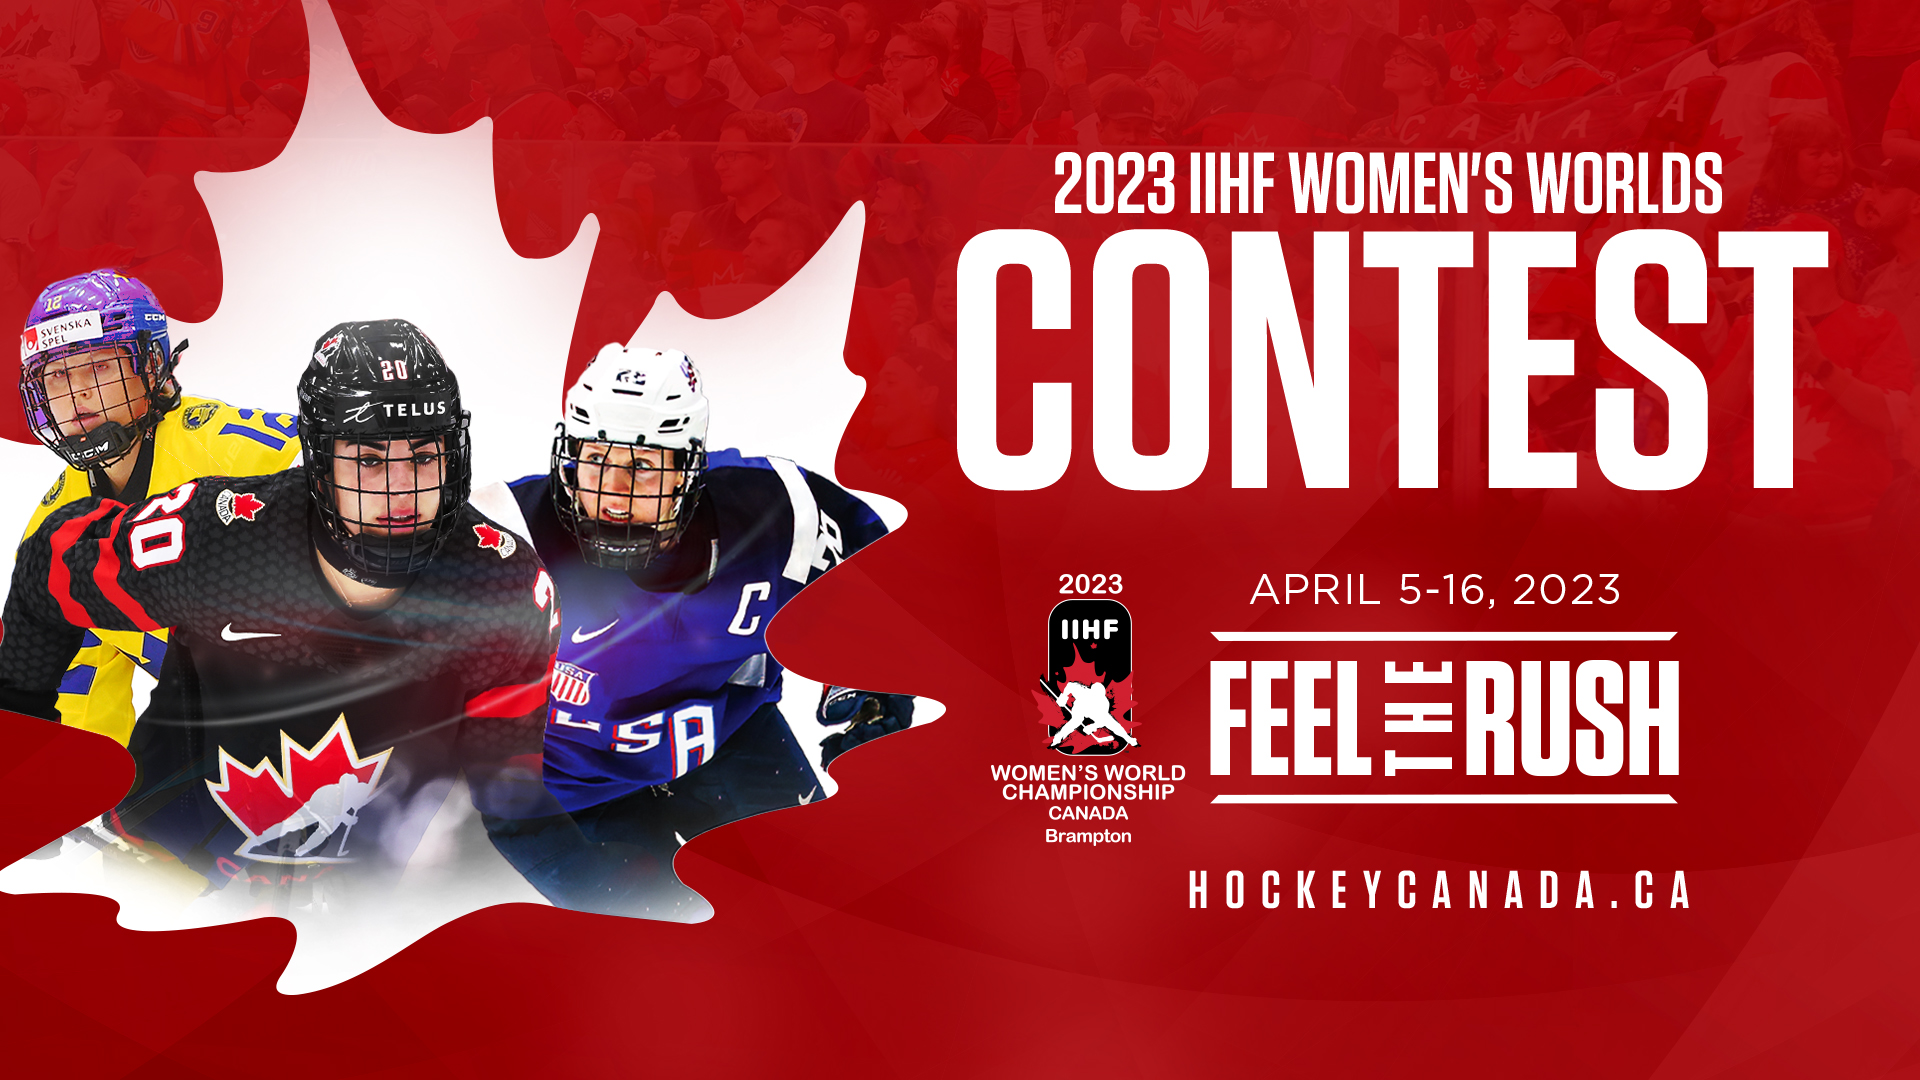 Three female hockey players are featured. The player at the front is from Team Canada. Text reads 2023 IIHF Women's Worlds Contest. April 5-15 2023 Feel the Rush. hockeycanada.ca. The 2023 IIHF logo is also included. 